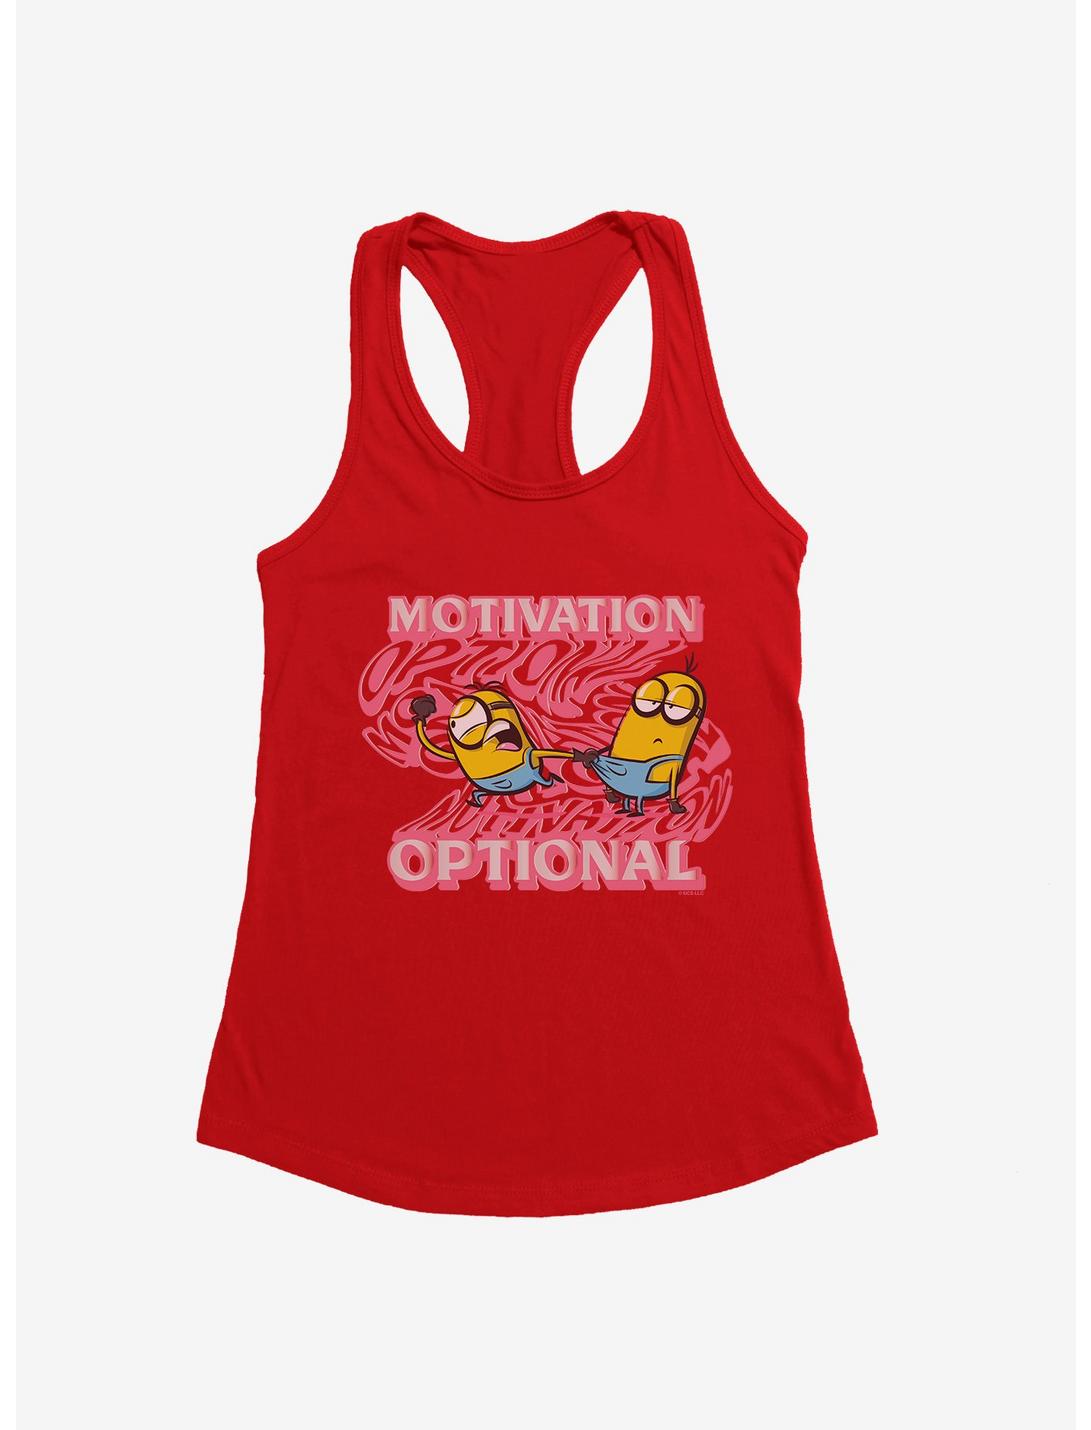 Minions Groovy Motivation Optional Girls Tank, RED, hi-res